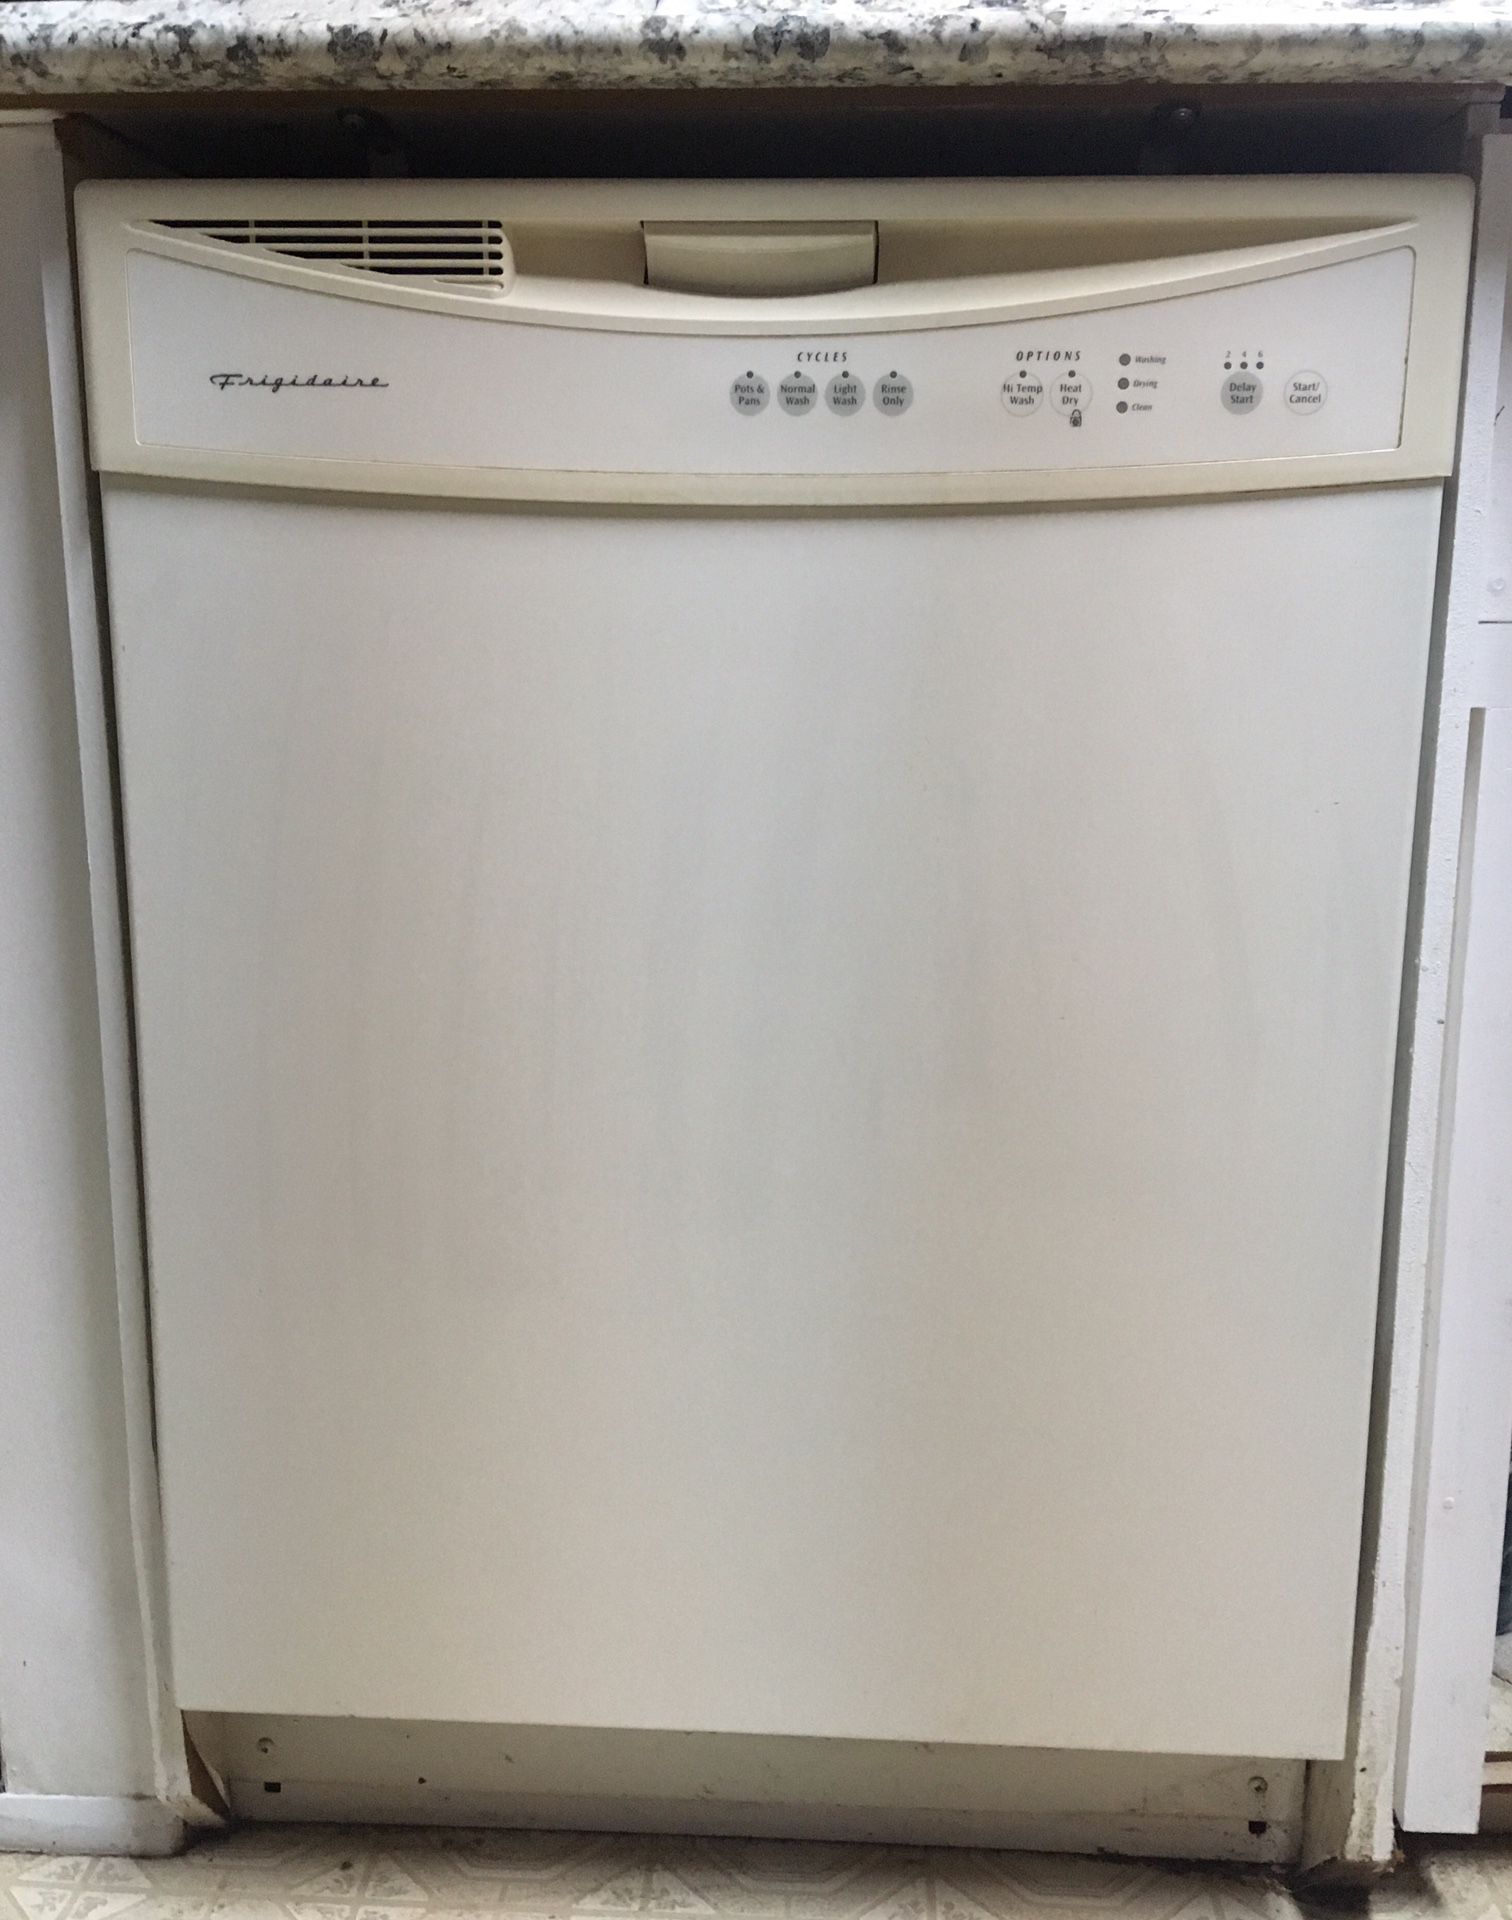 Dishwasher under the counter type off white